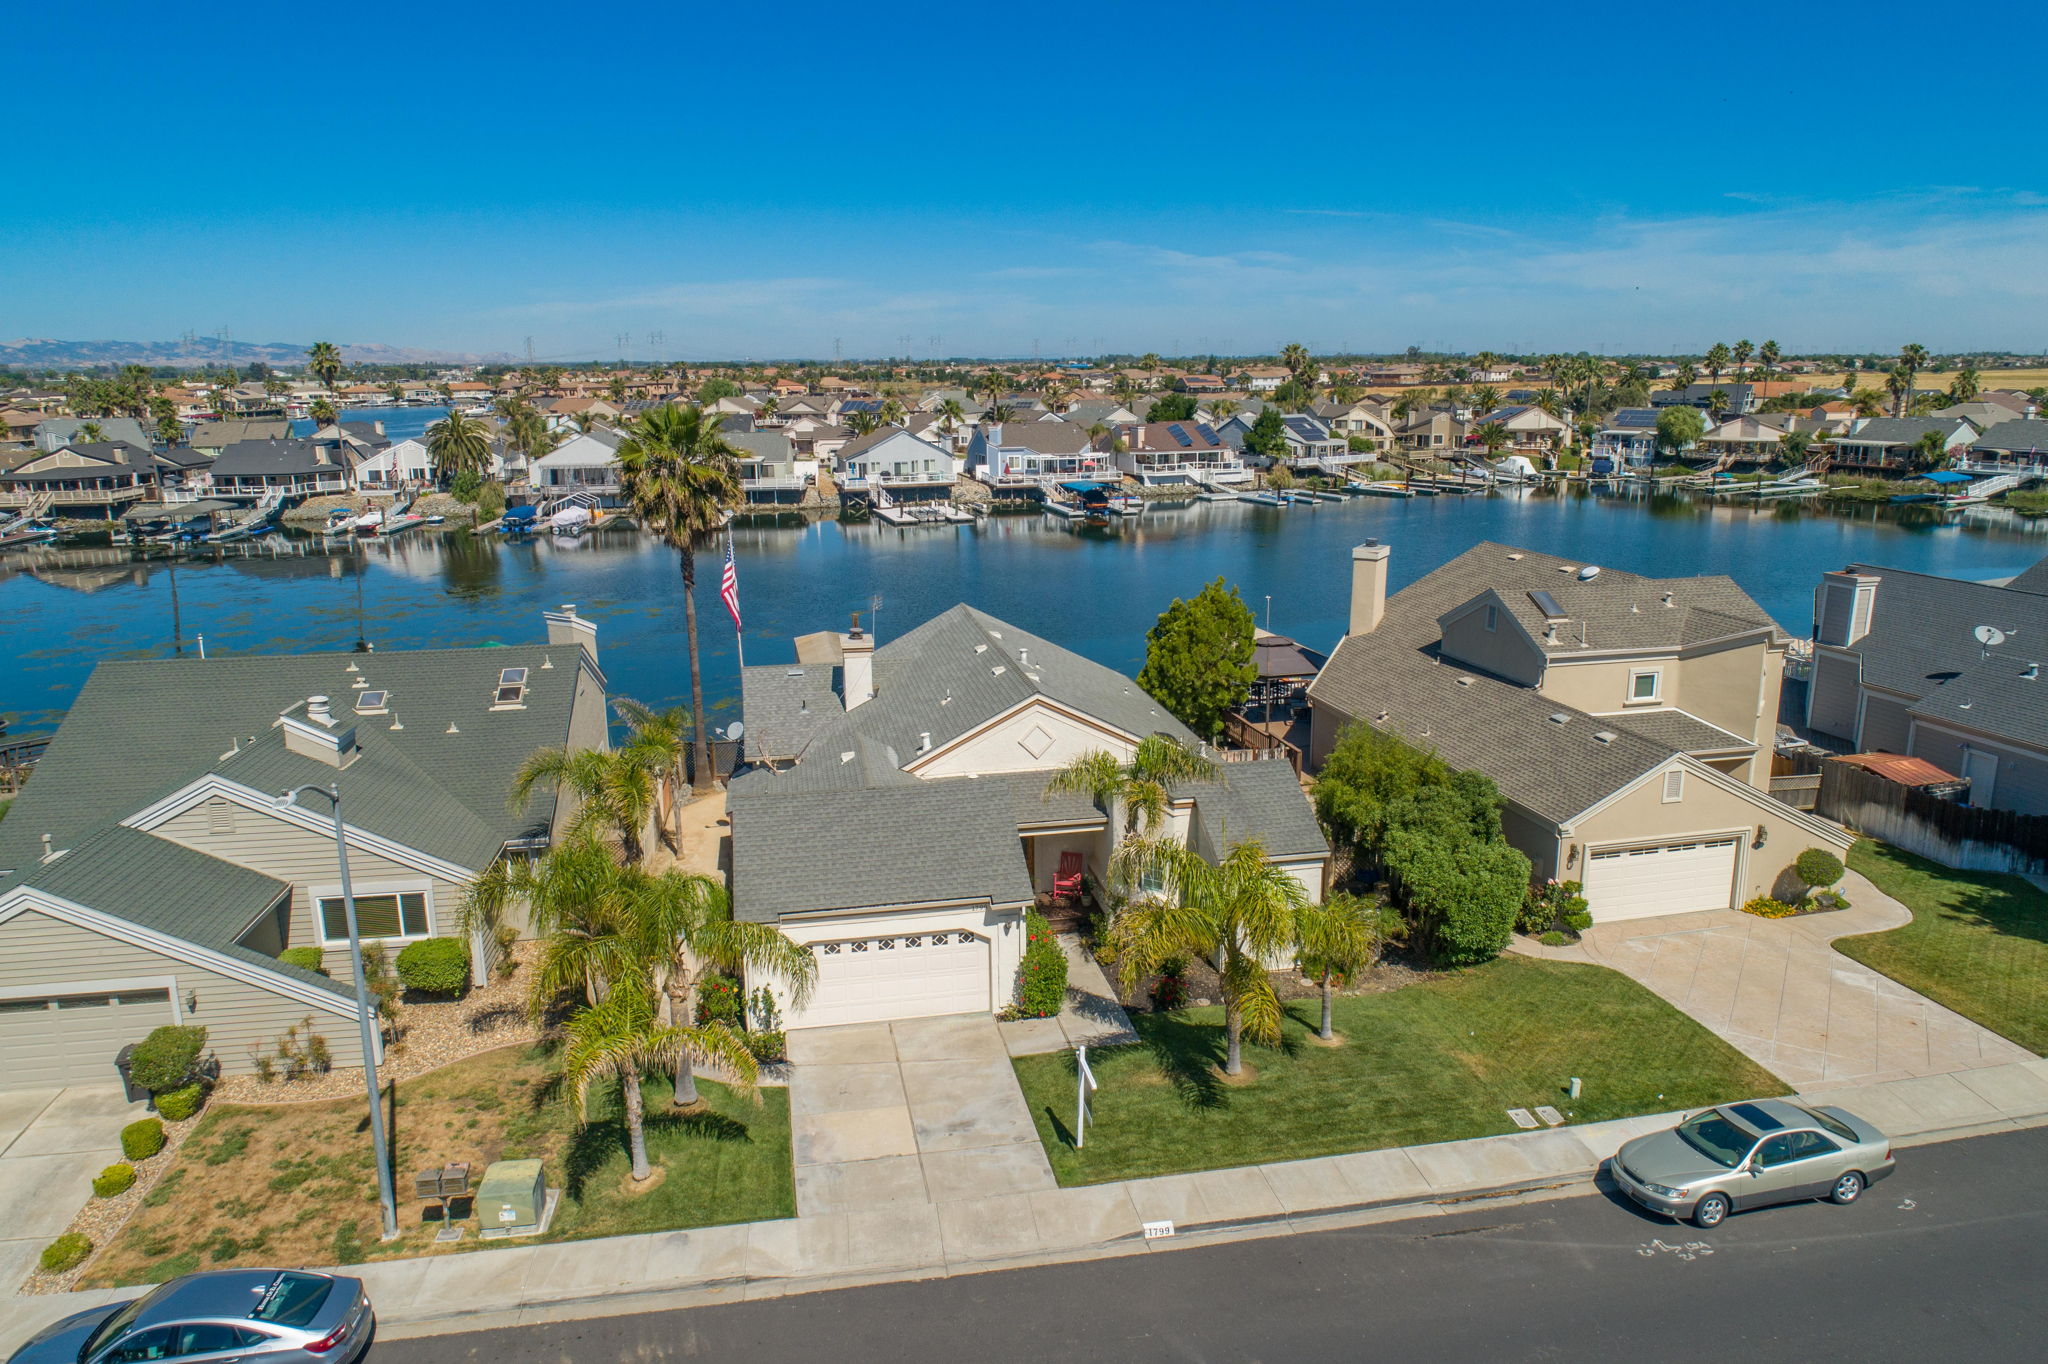  1799 Dune Point Way, Discovery Bay, CA 94505, US